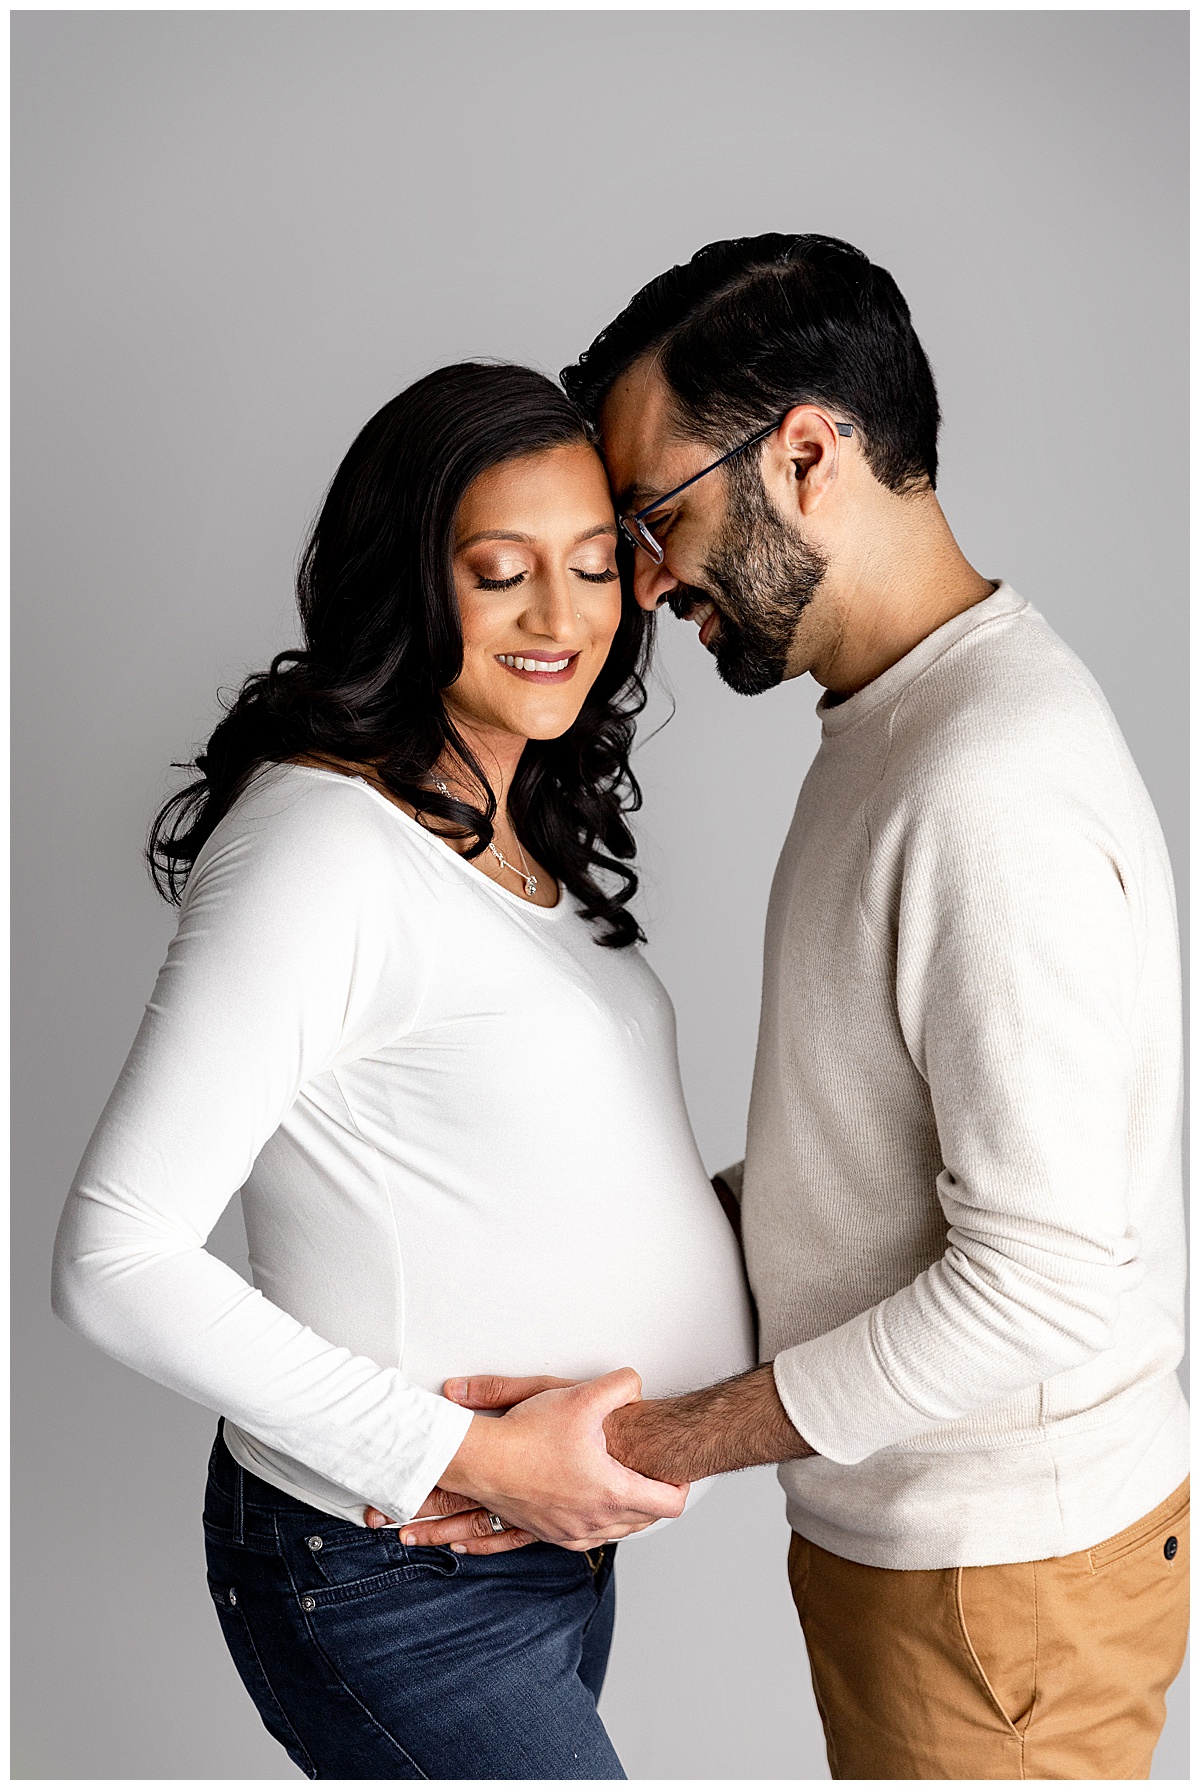 Dad embraces baby bump for Virginia Maternity Photographer